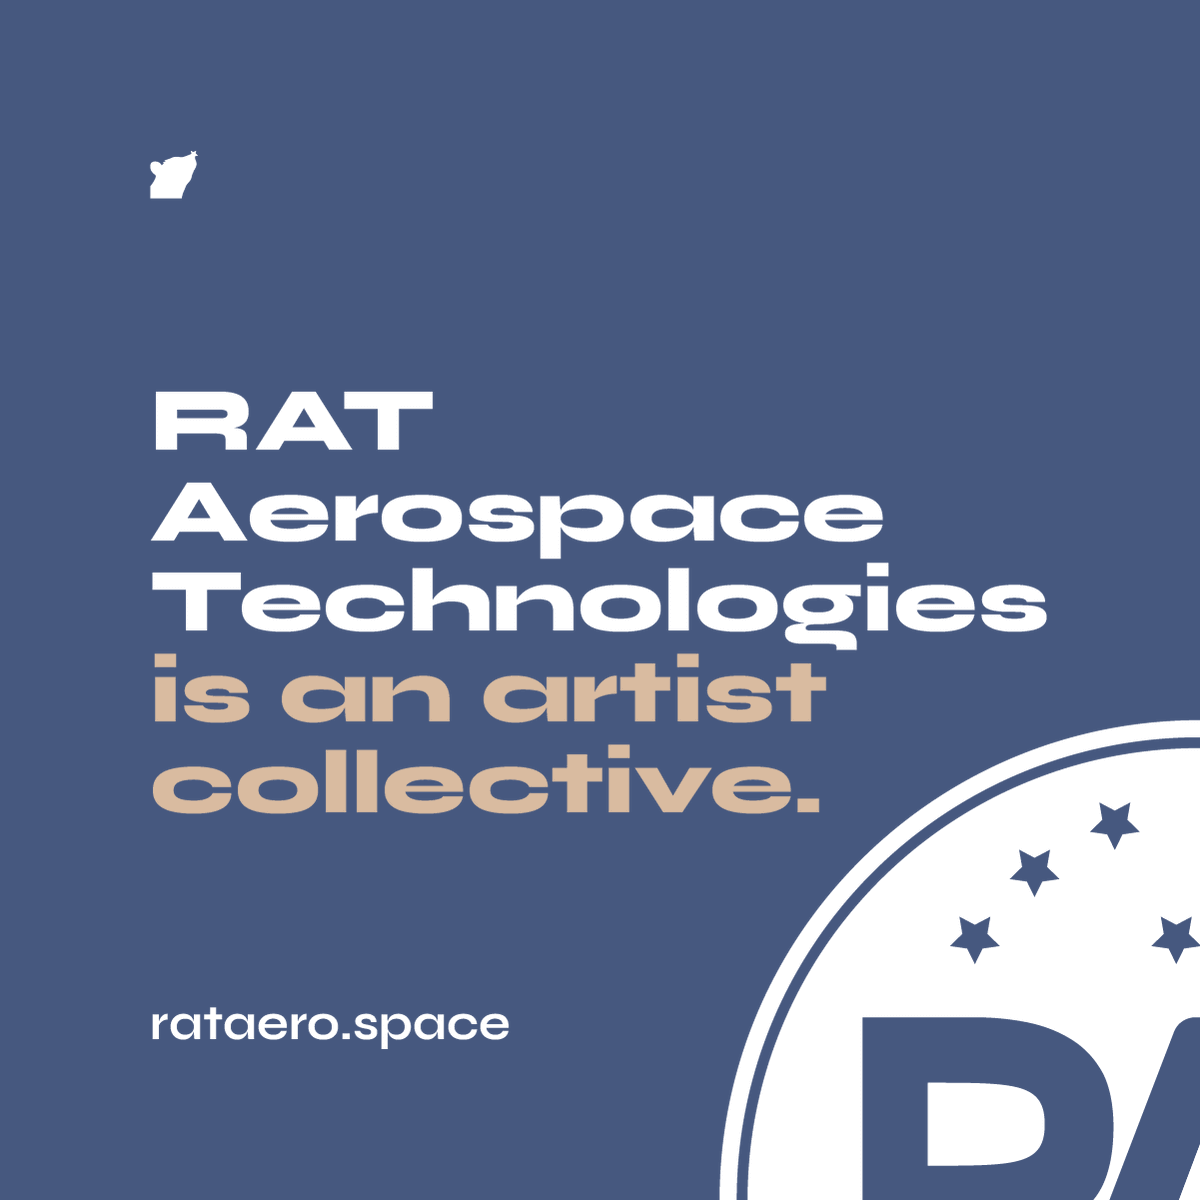 A text-only image stating 'RAT Aerospace Technologies is an artist collective.